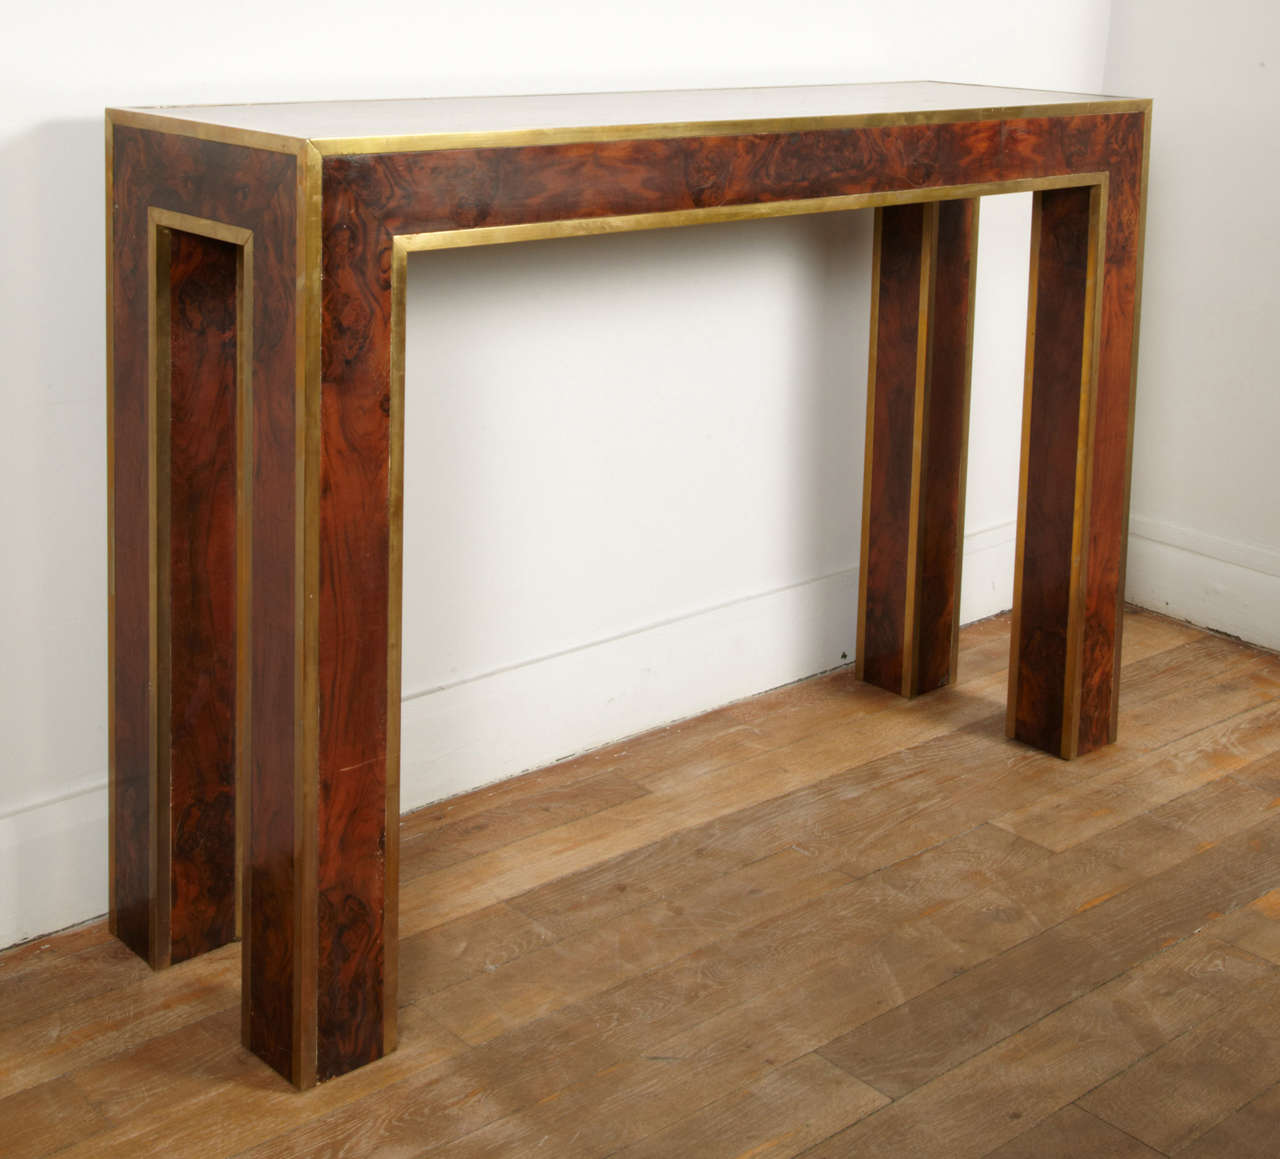 Console table in burr walnut with bronze edges
1970